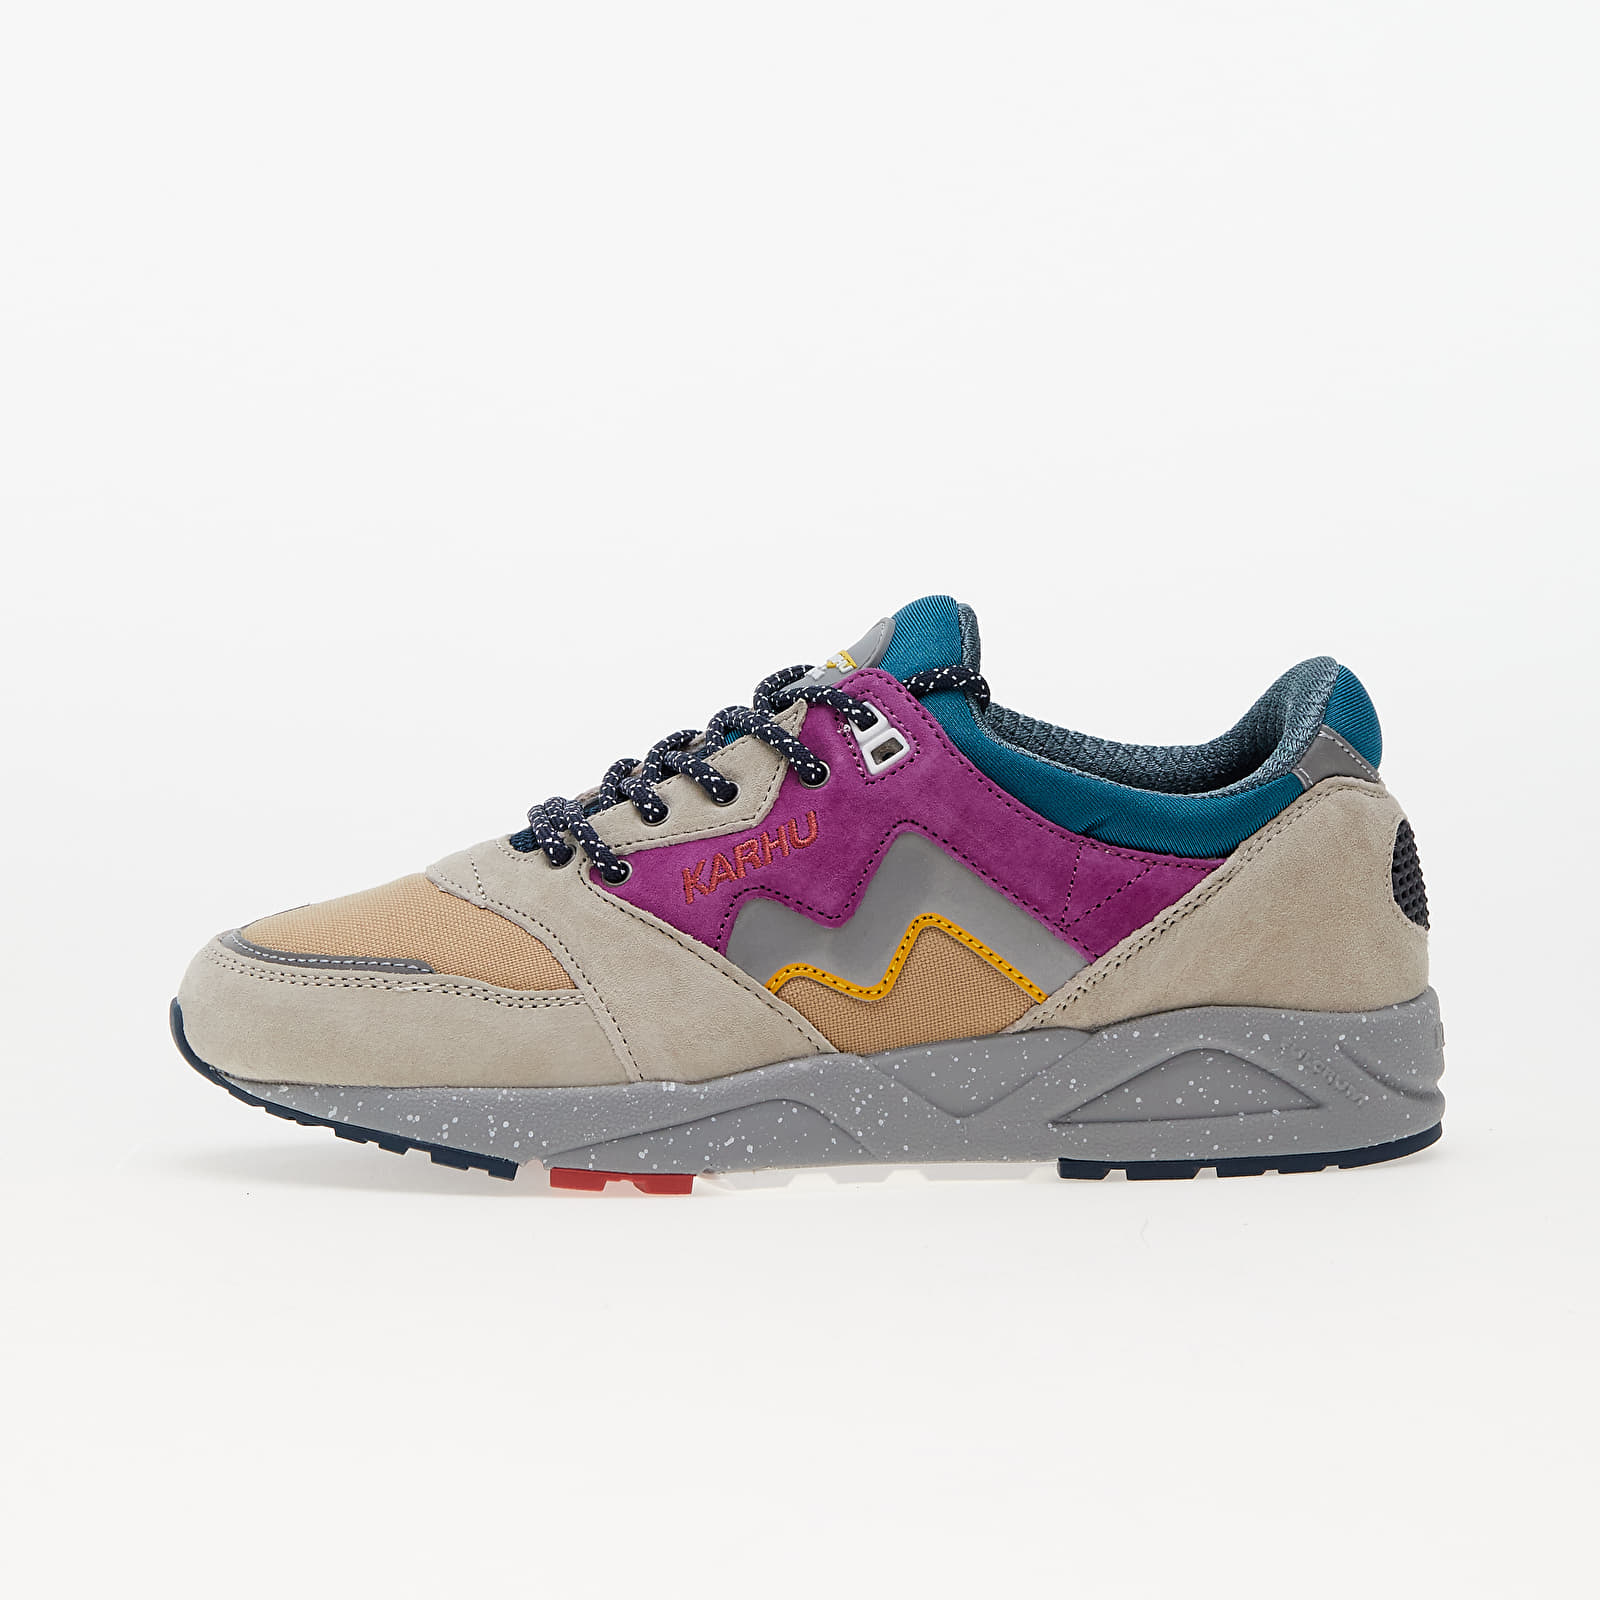 Men's shoes Karhu Aria 95 Silver Lining/ Mulberry